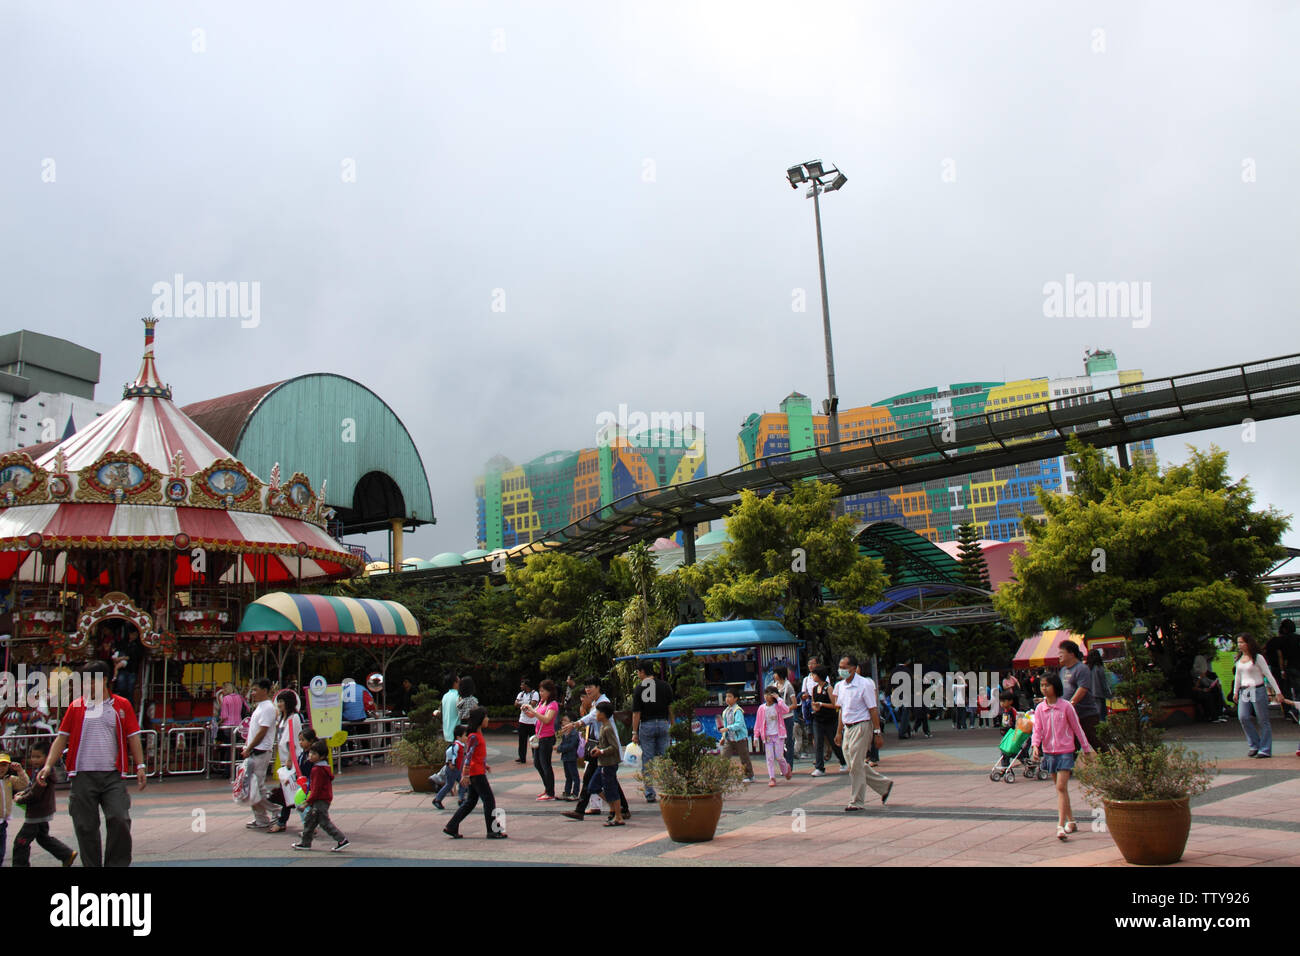 Parco a tema all'aperto, Genting Highlands, Malesia Foto Stock